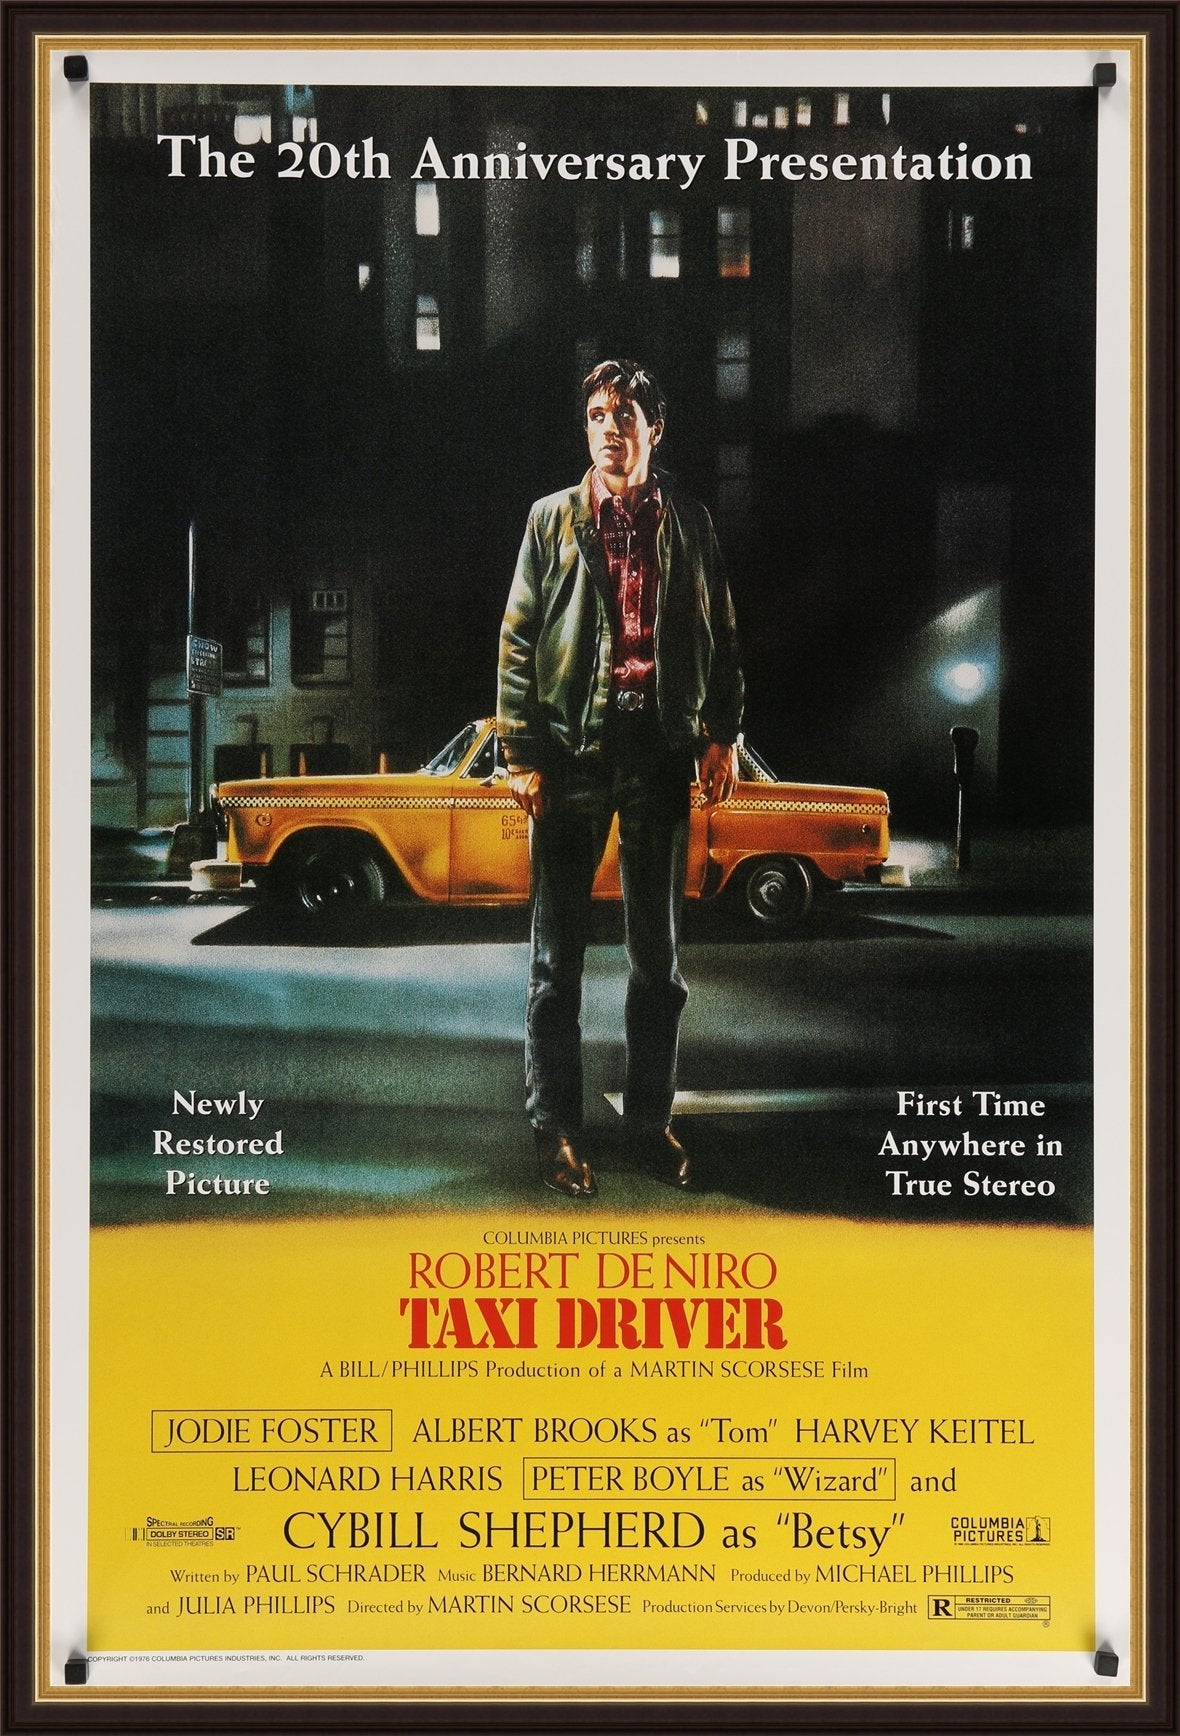 An original movie poster for the film Taxi Driver